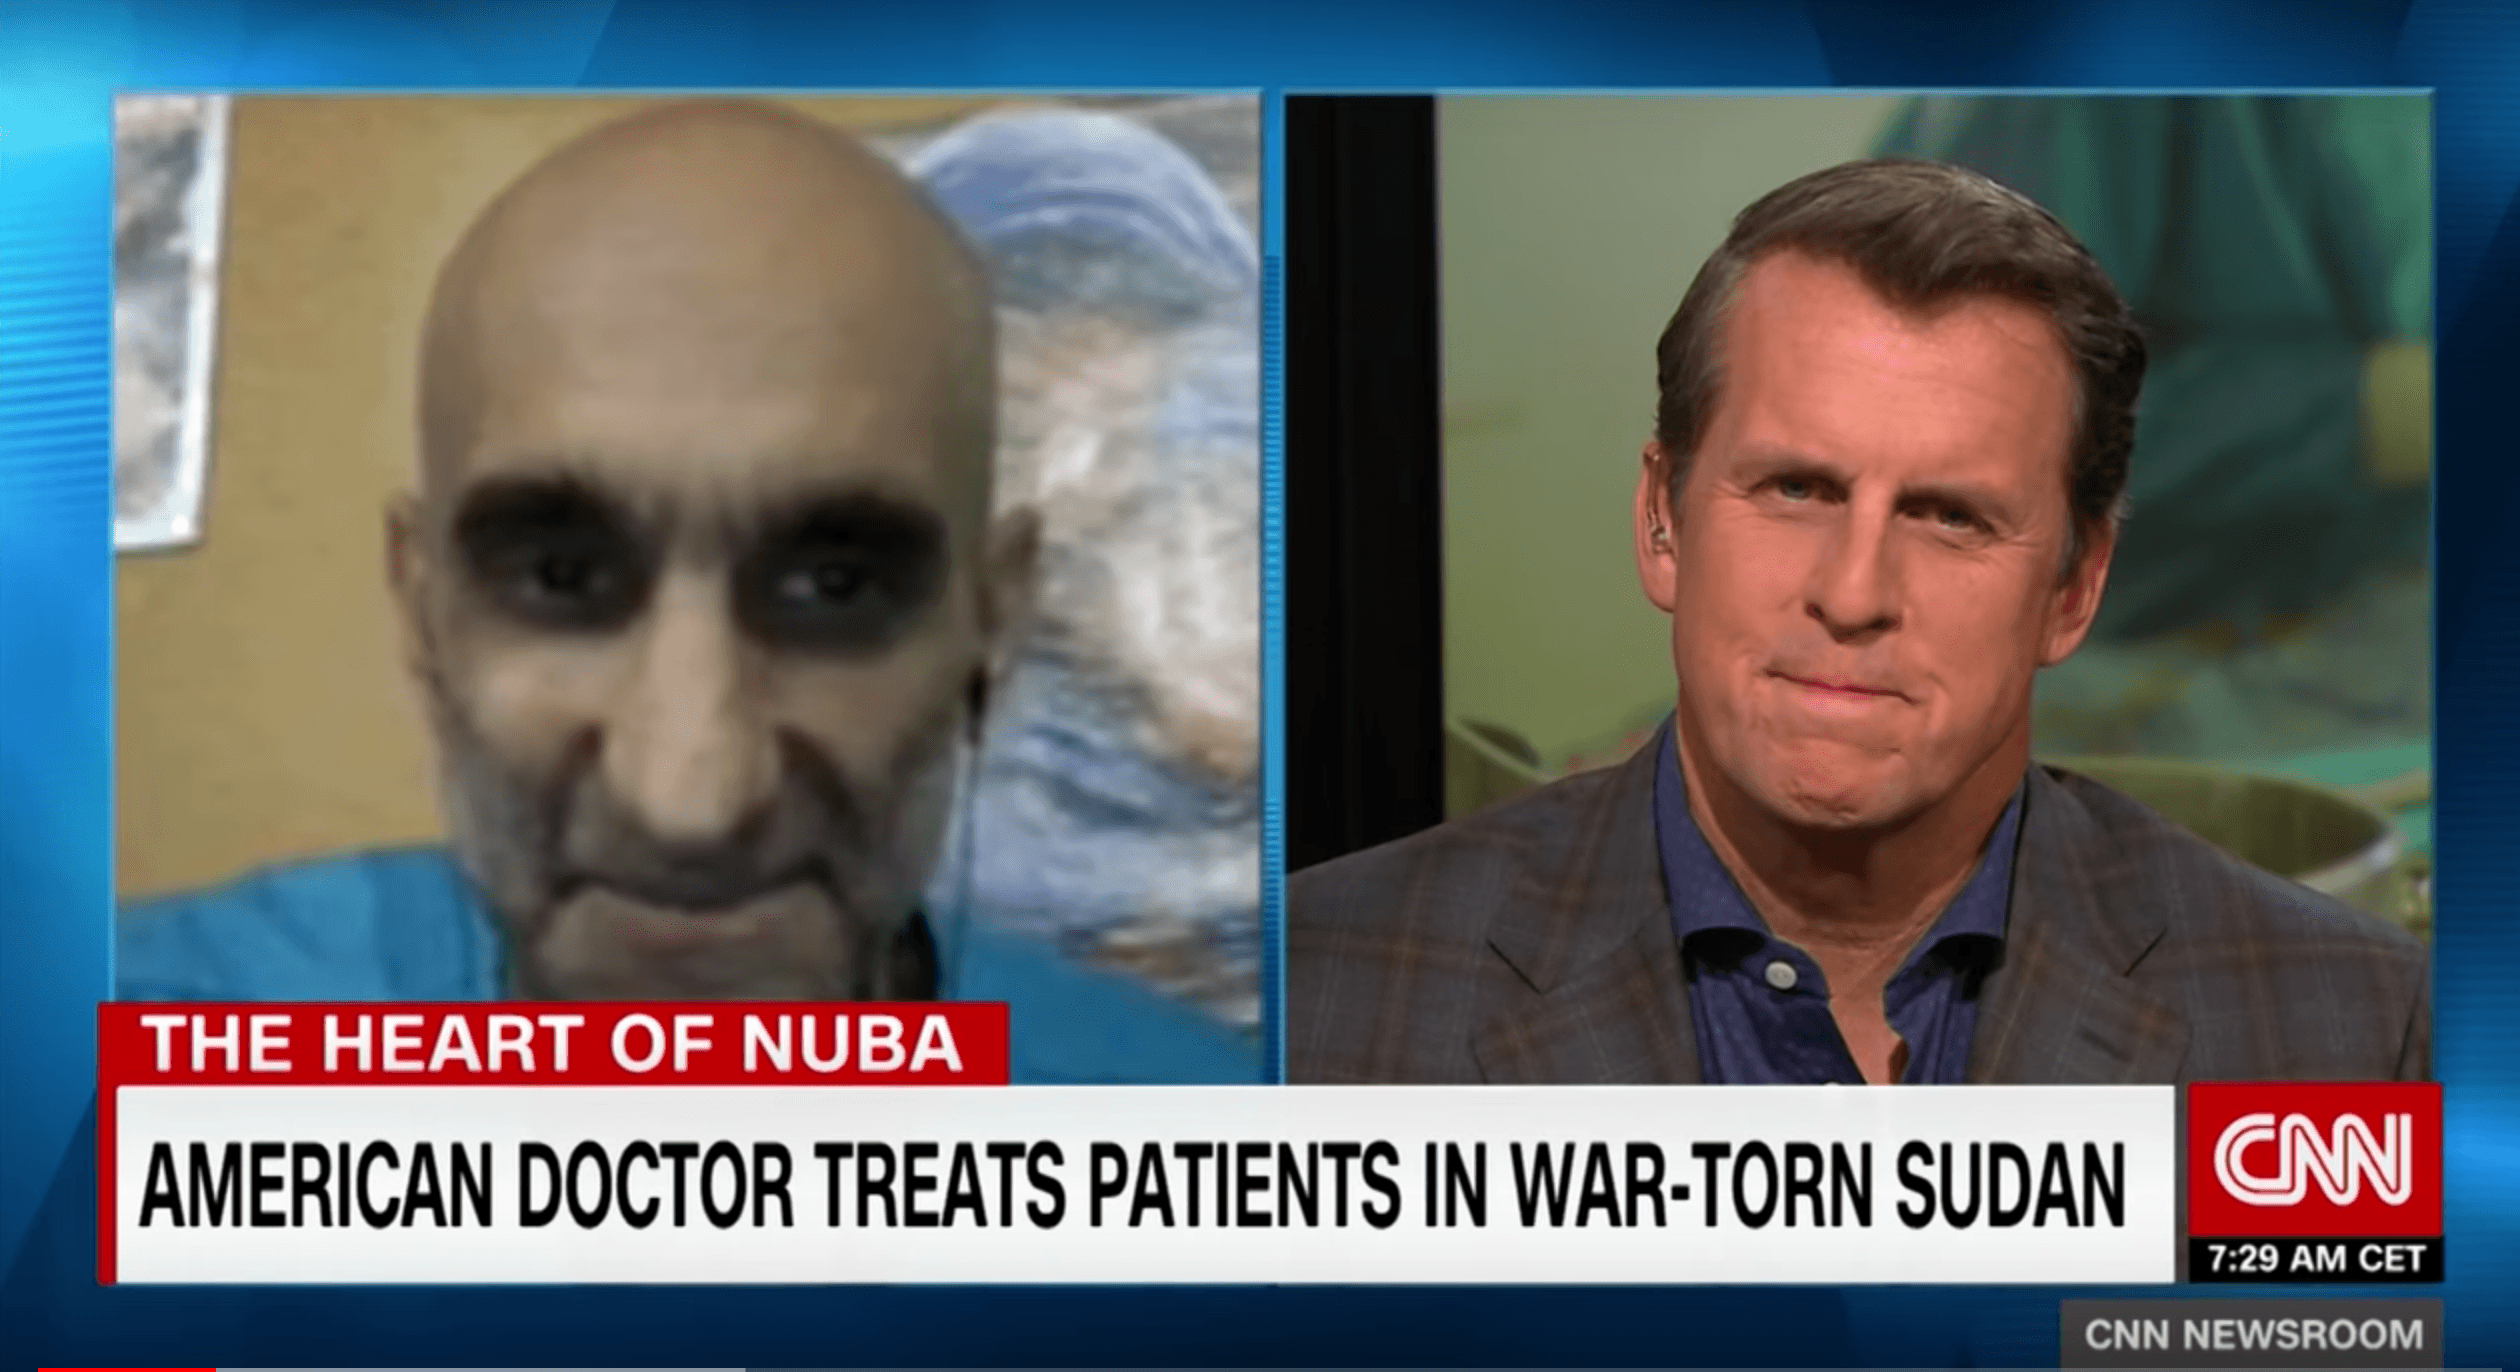 Dr. Tom Catena and Ken Carlson were on CNN.